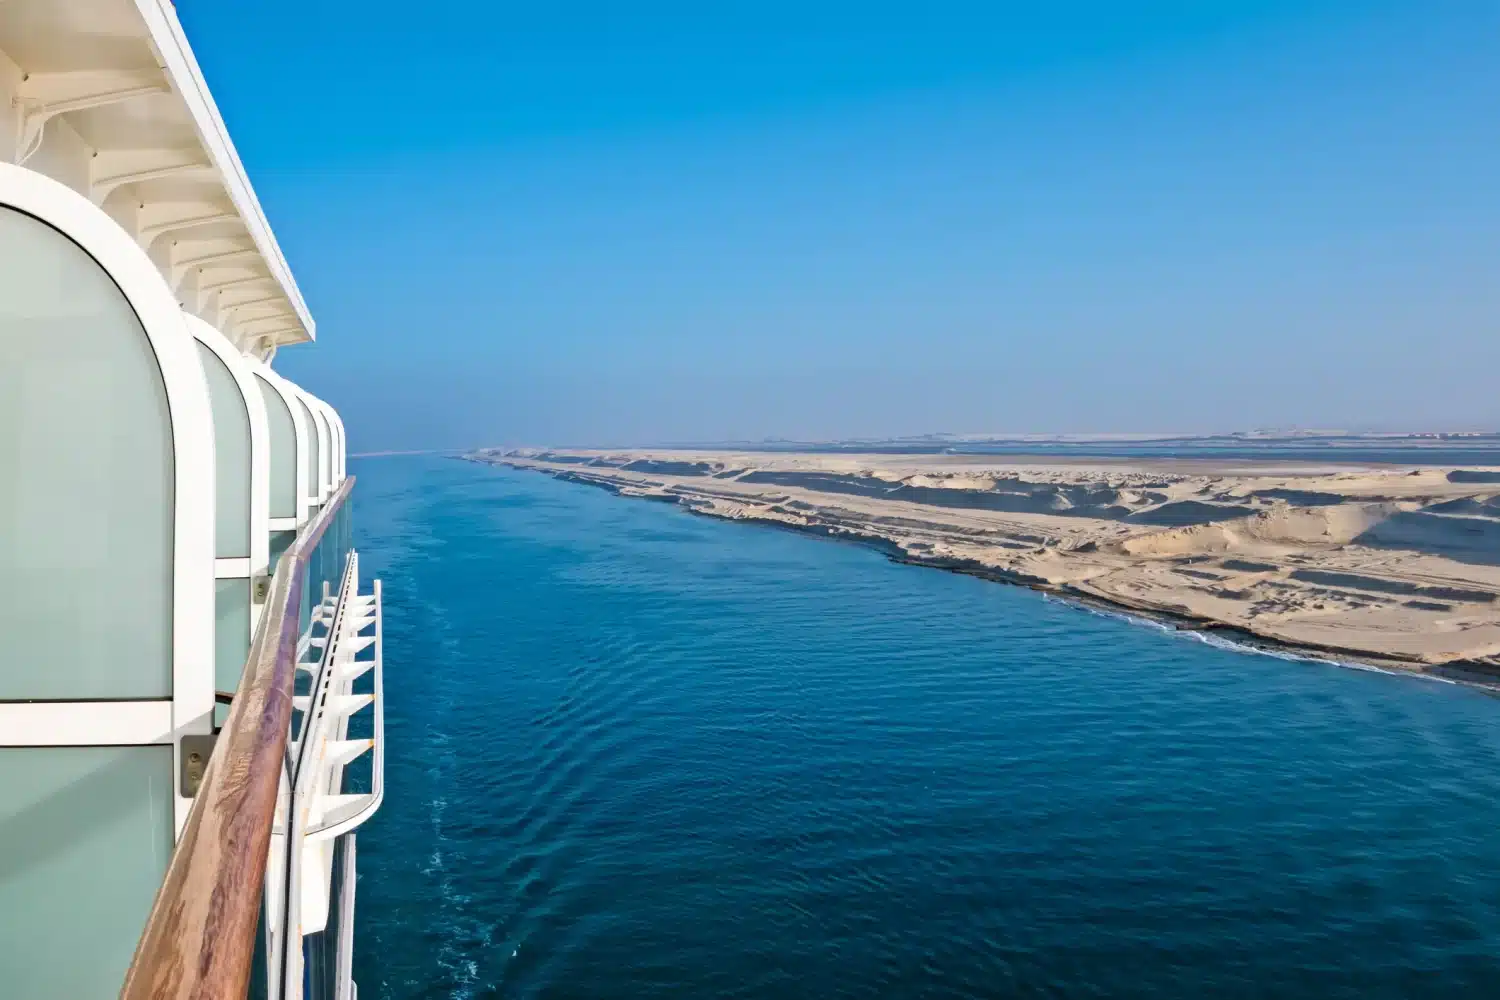 Cruise ship in the Suez Canal